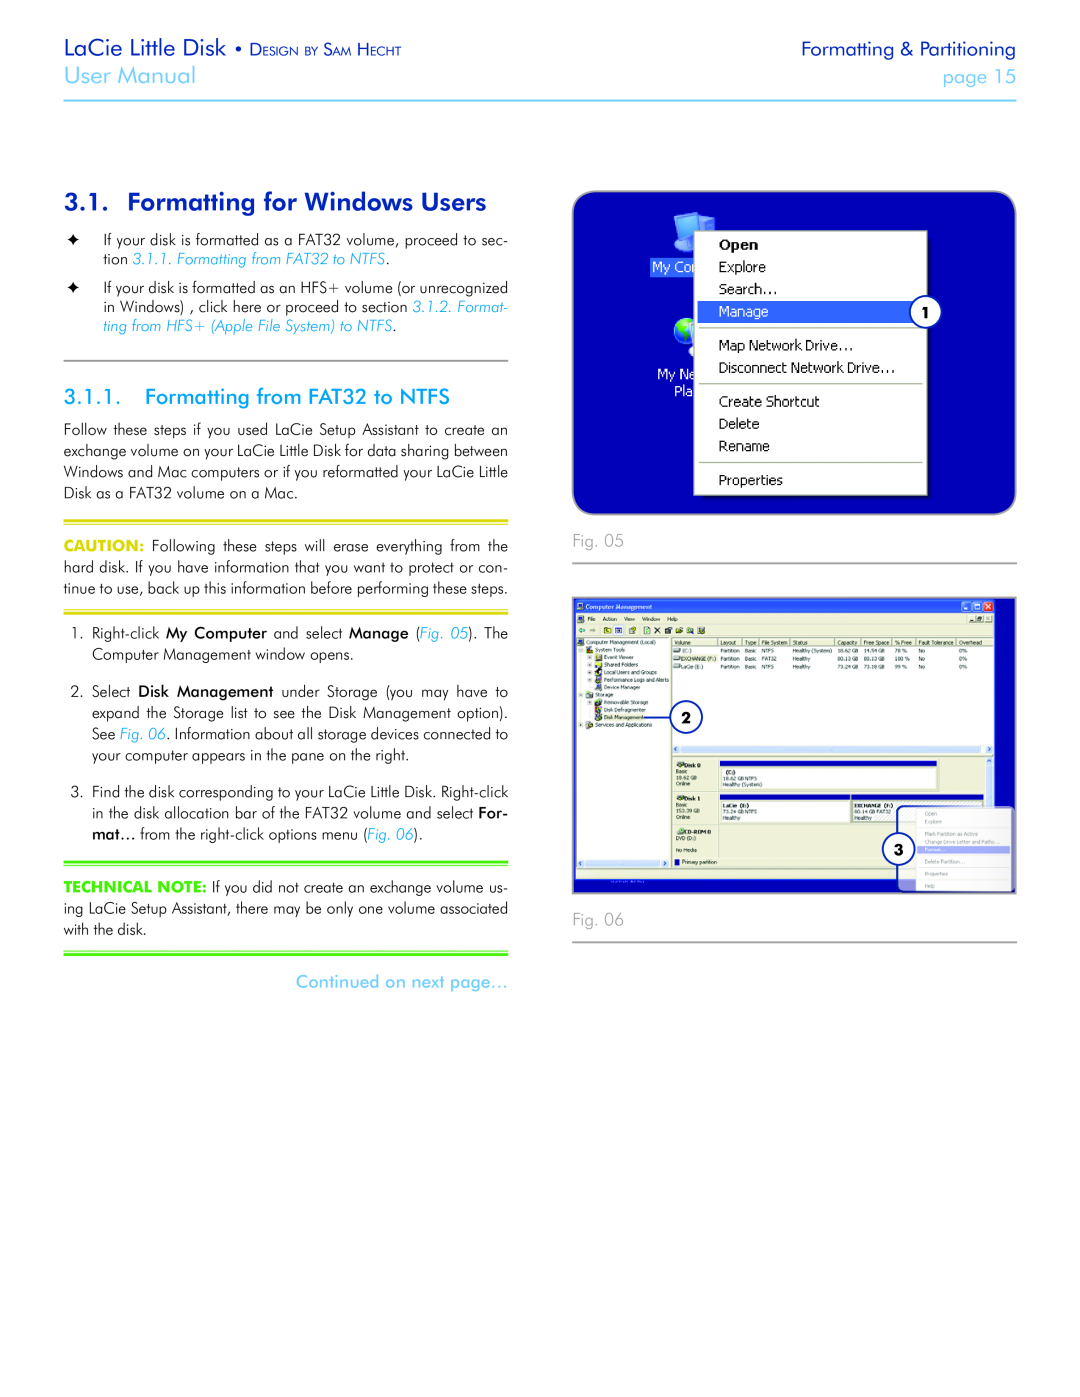 LaCie Little Big Disk Formatting for Windows Users, Formatting from FAT32 to NTFS, Continued on next page…, User Manual 